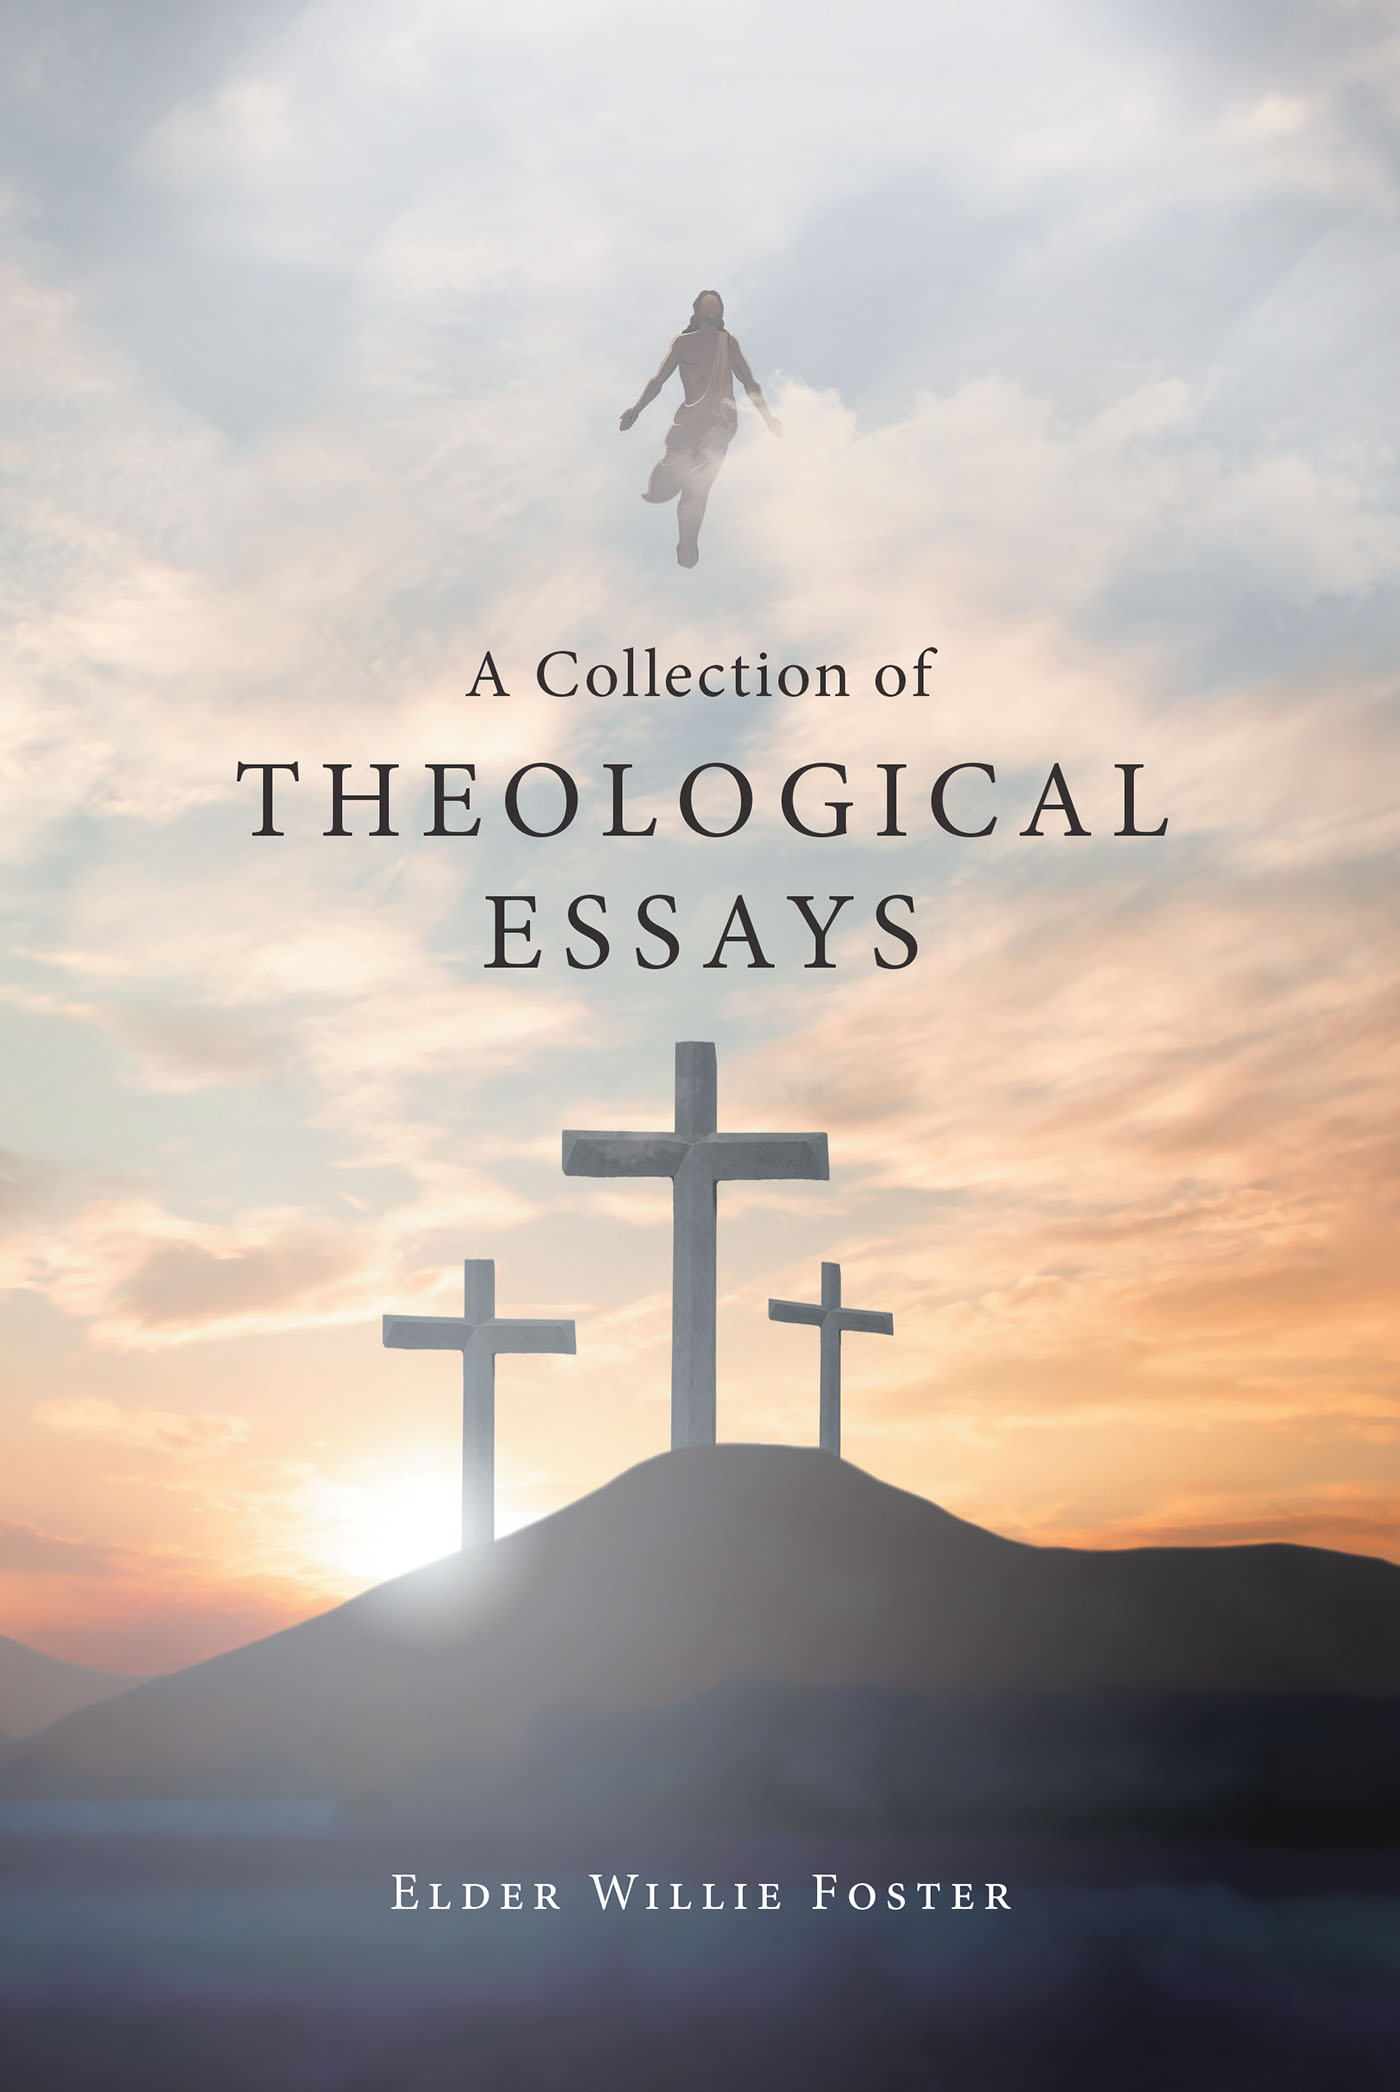 Author Elder Willie Foster’s New Book, "A Collection of Theological Essays," Inspires All Readers to Dig Deeper & Further Into God’s Word to Learn More About Themselves